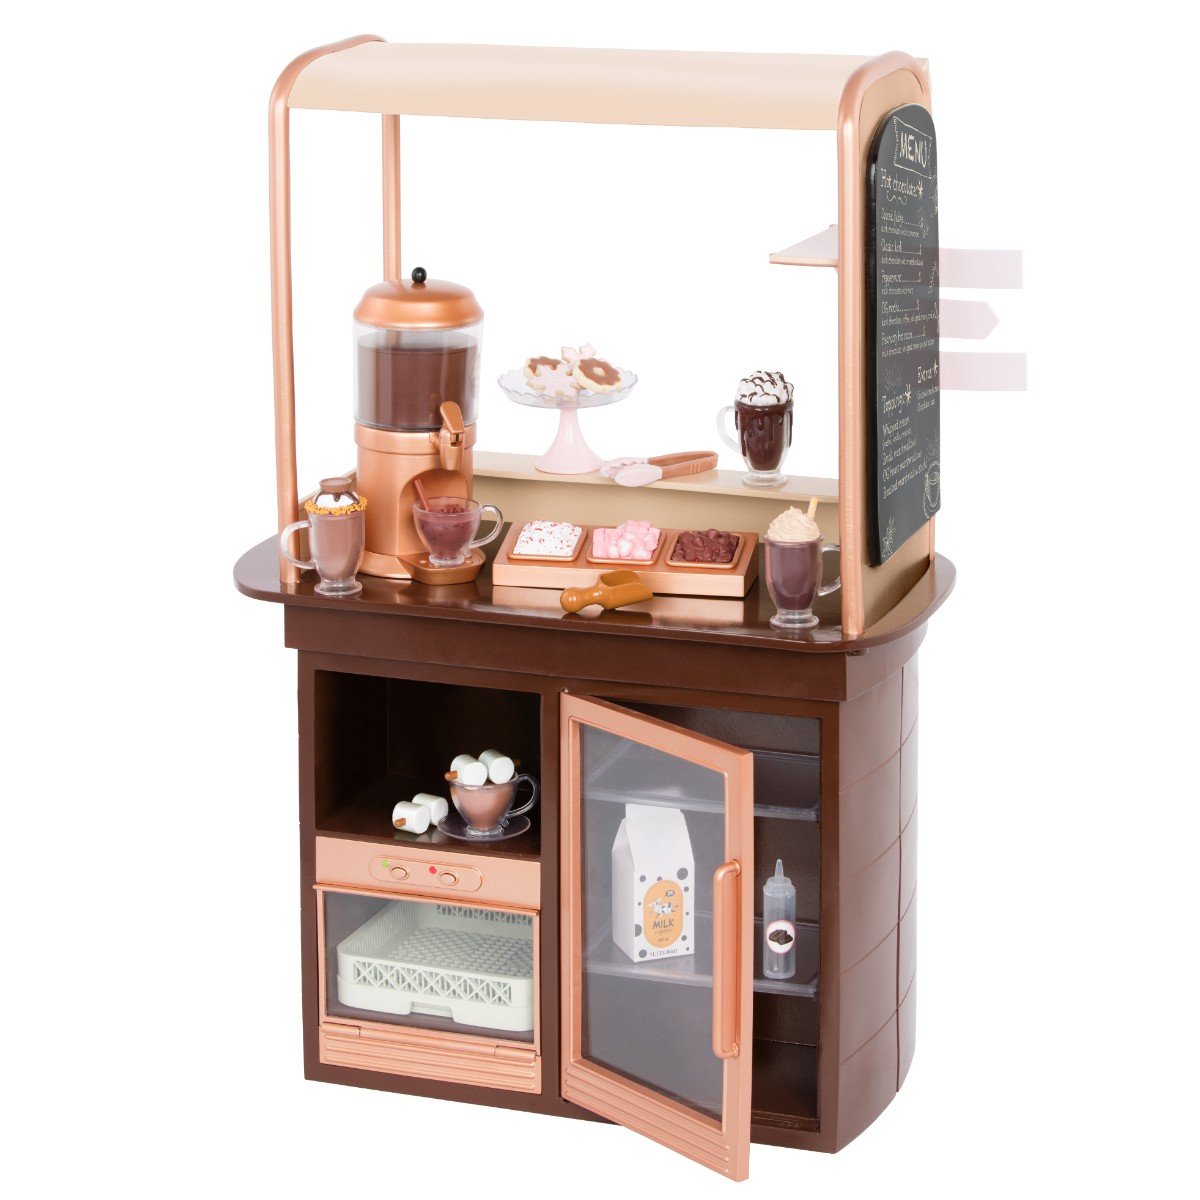 Our Generation - Choco-tastic Hot Chocolate Stand (737964)